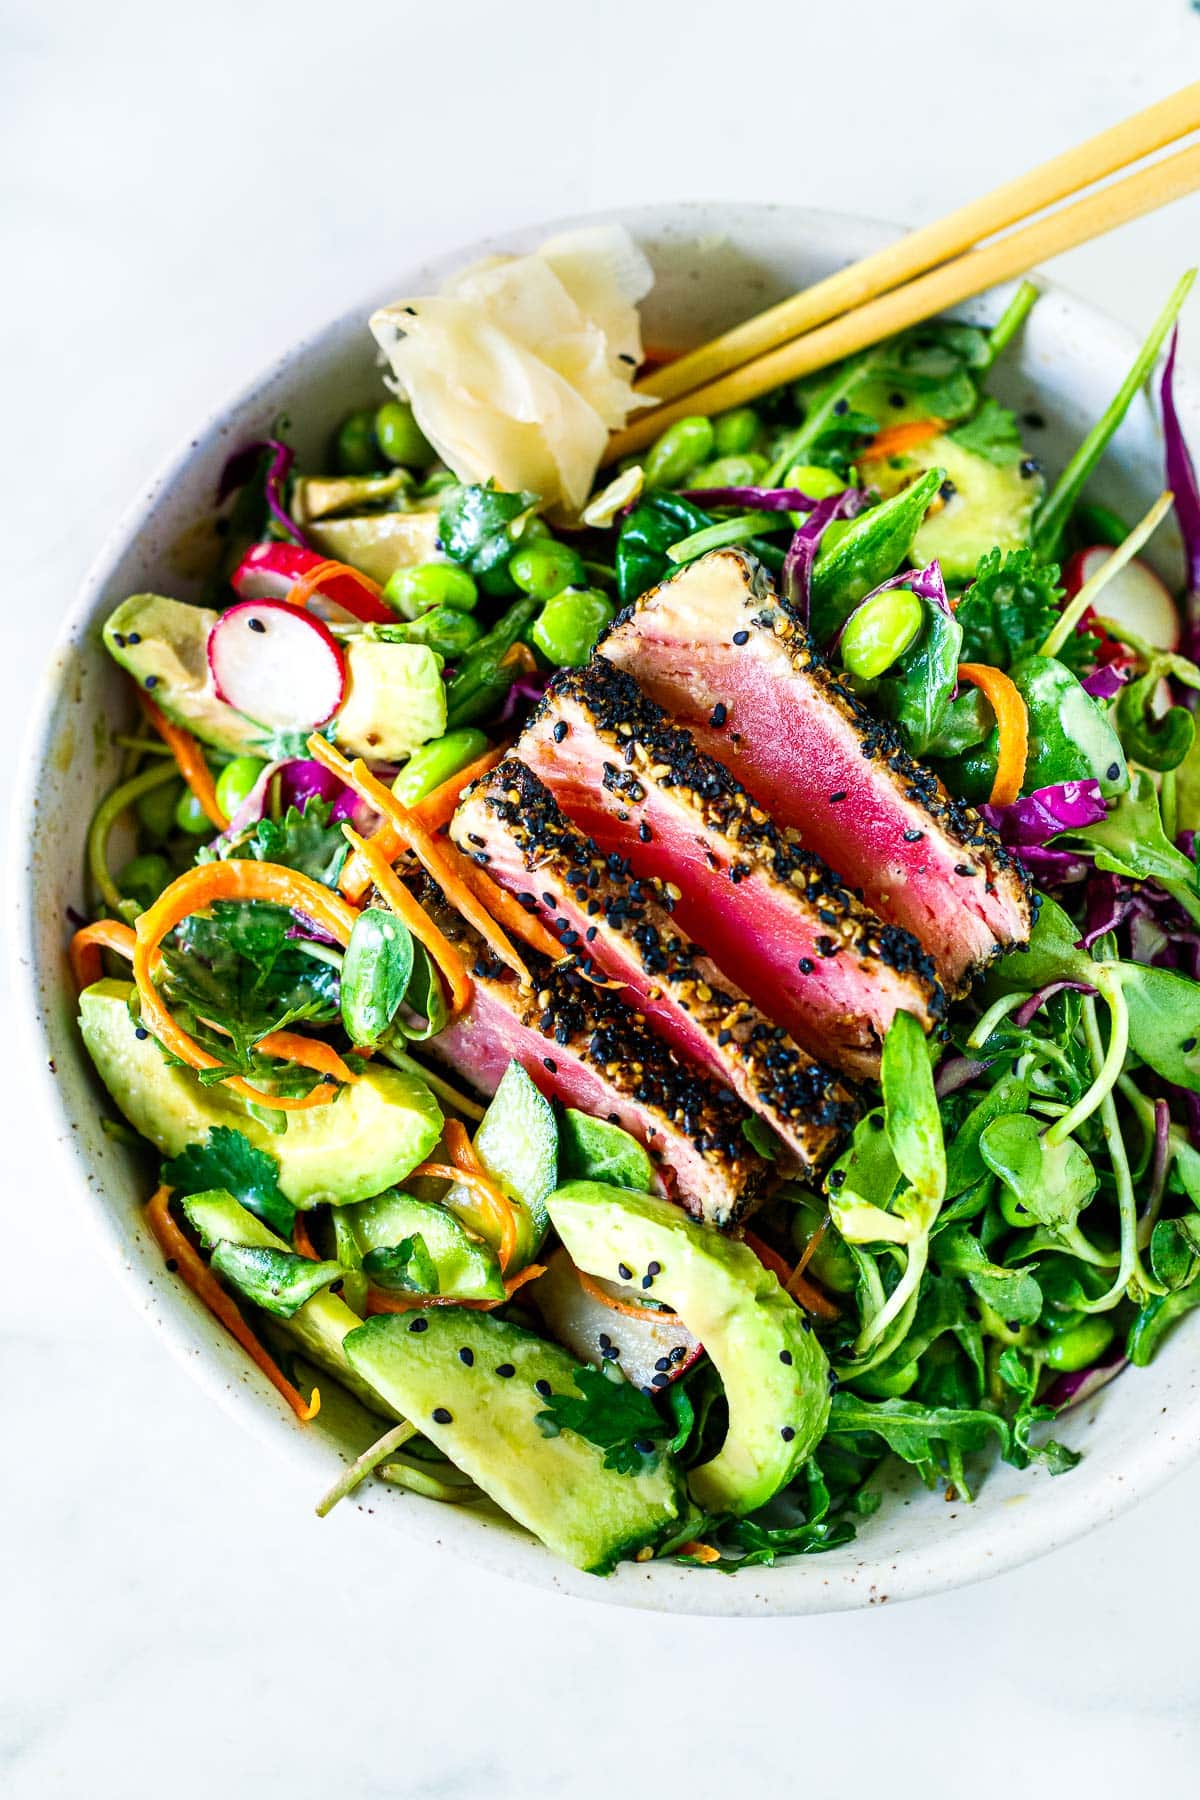 This sesame-crusted seared ahi tuna salad recipe is deliciously refreshing and light! Served over fresh greens with avocado, cucumber, edamame, grated carrots, cabbage, radishes, and sunflower sprouts tossed in a ginger wasabi vinaigrette.